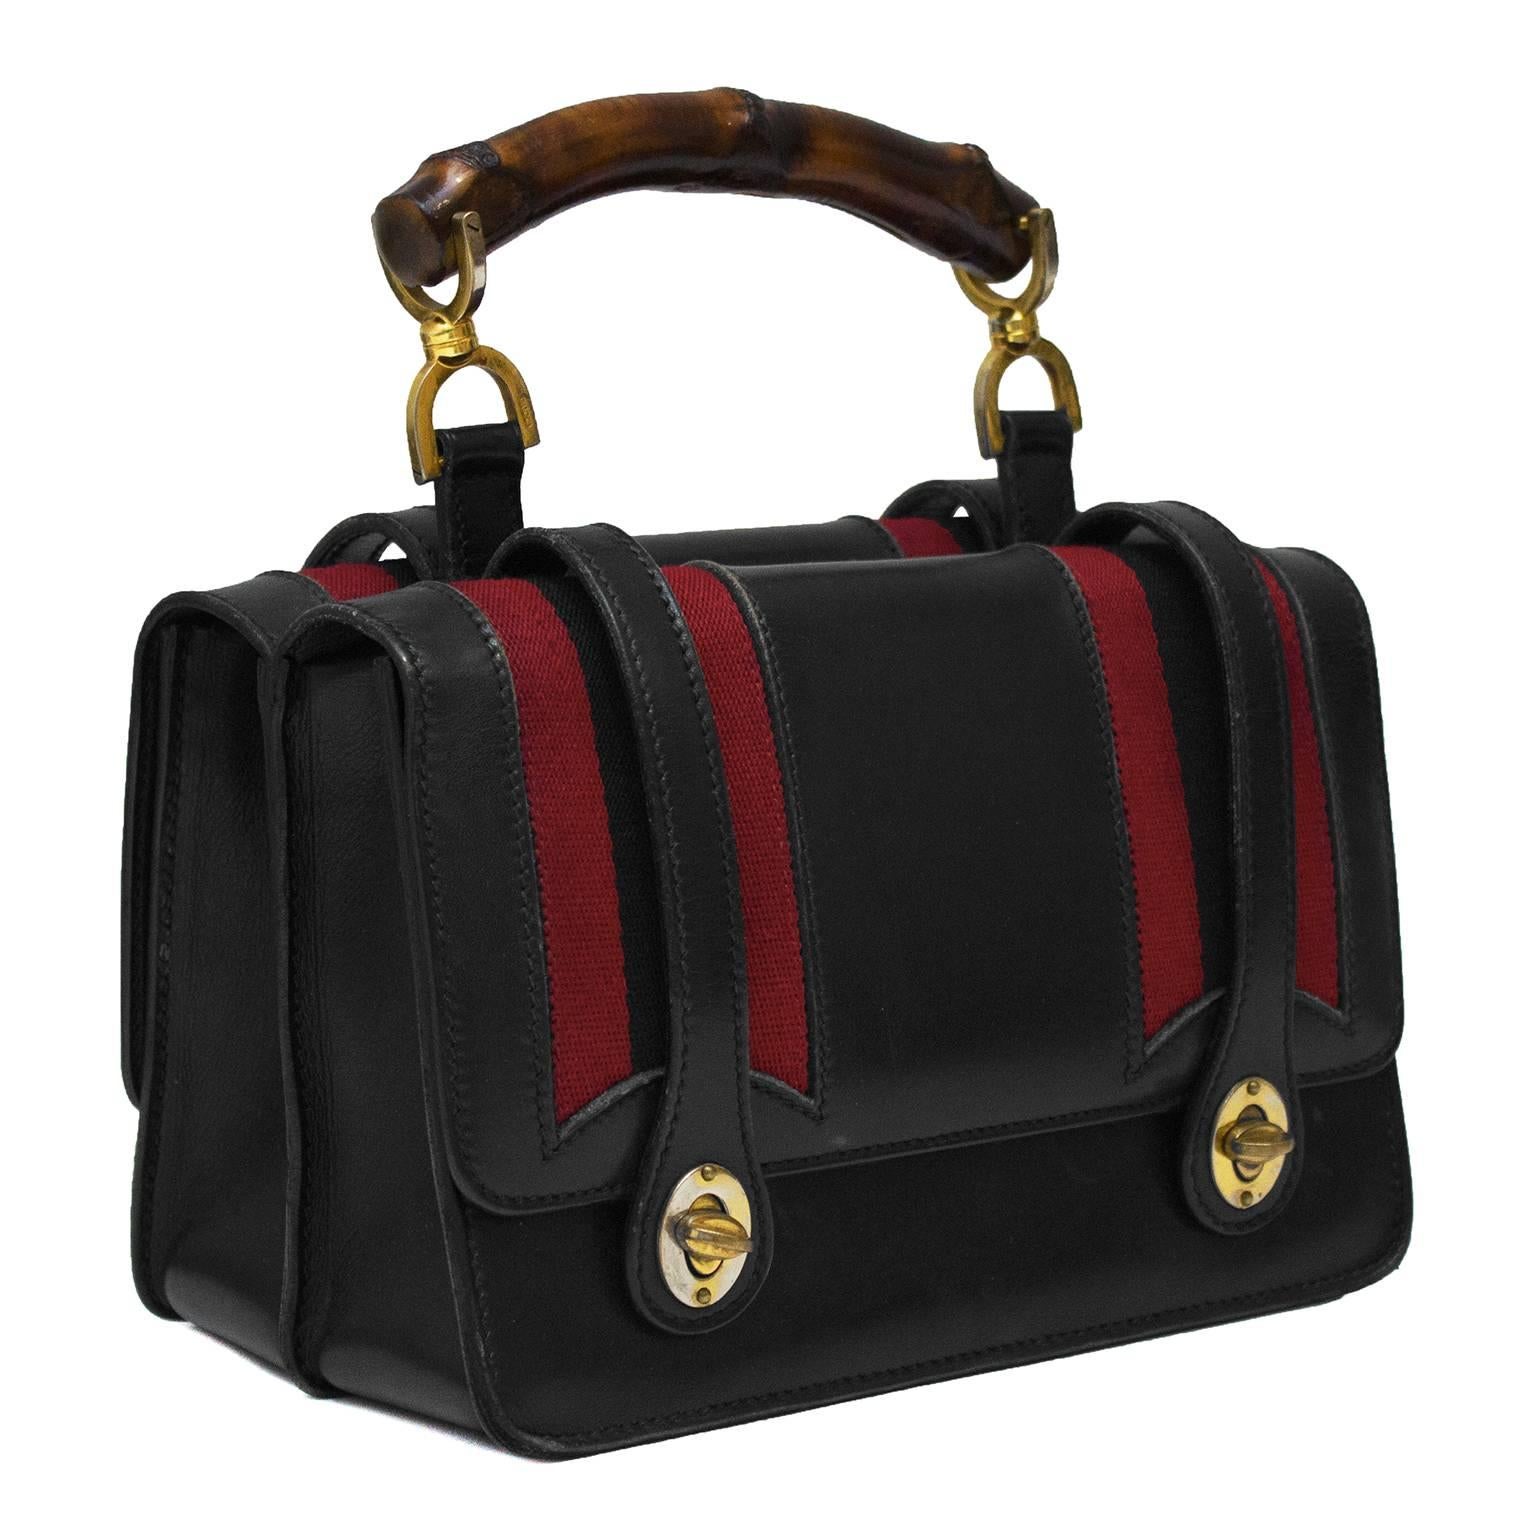 Gucci double compartment black leather handbag from the 1960's. The bag has two identical top flap pocket compartments on either side with red fabric stripes down the side. Closes with two turnlocks on either end and finished with a wooden bamboo